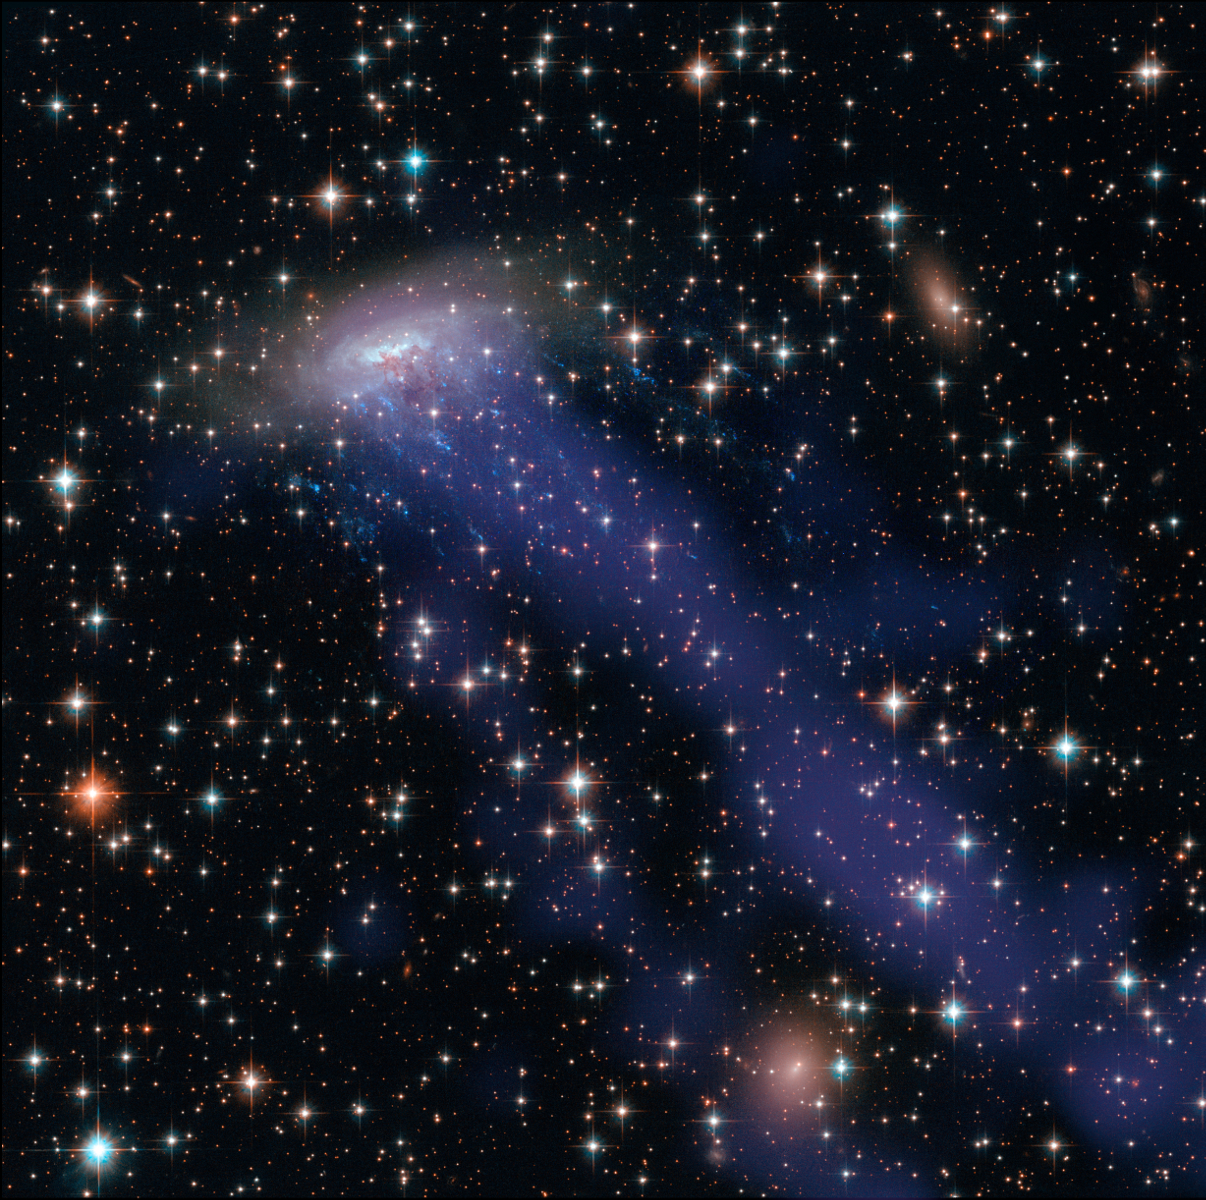 Composite view of ESO 137-00